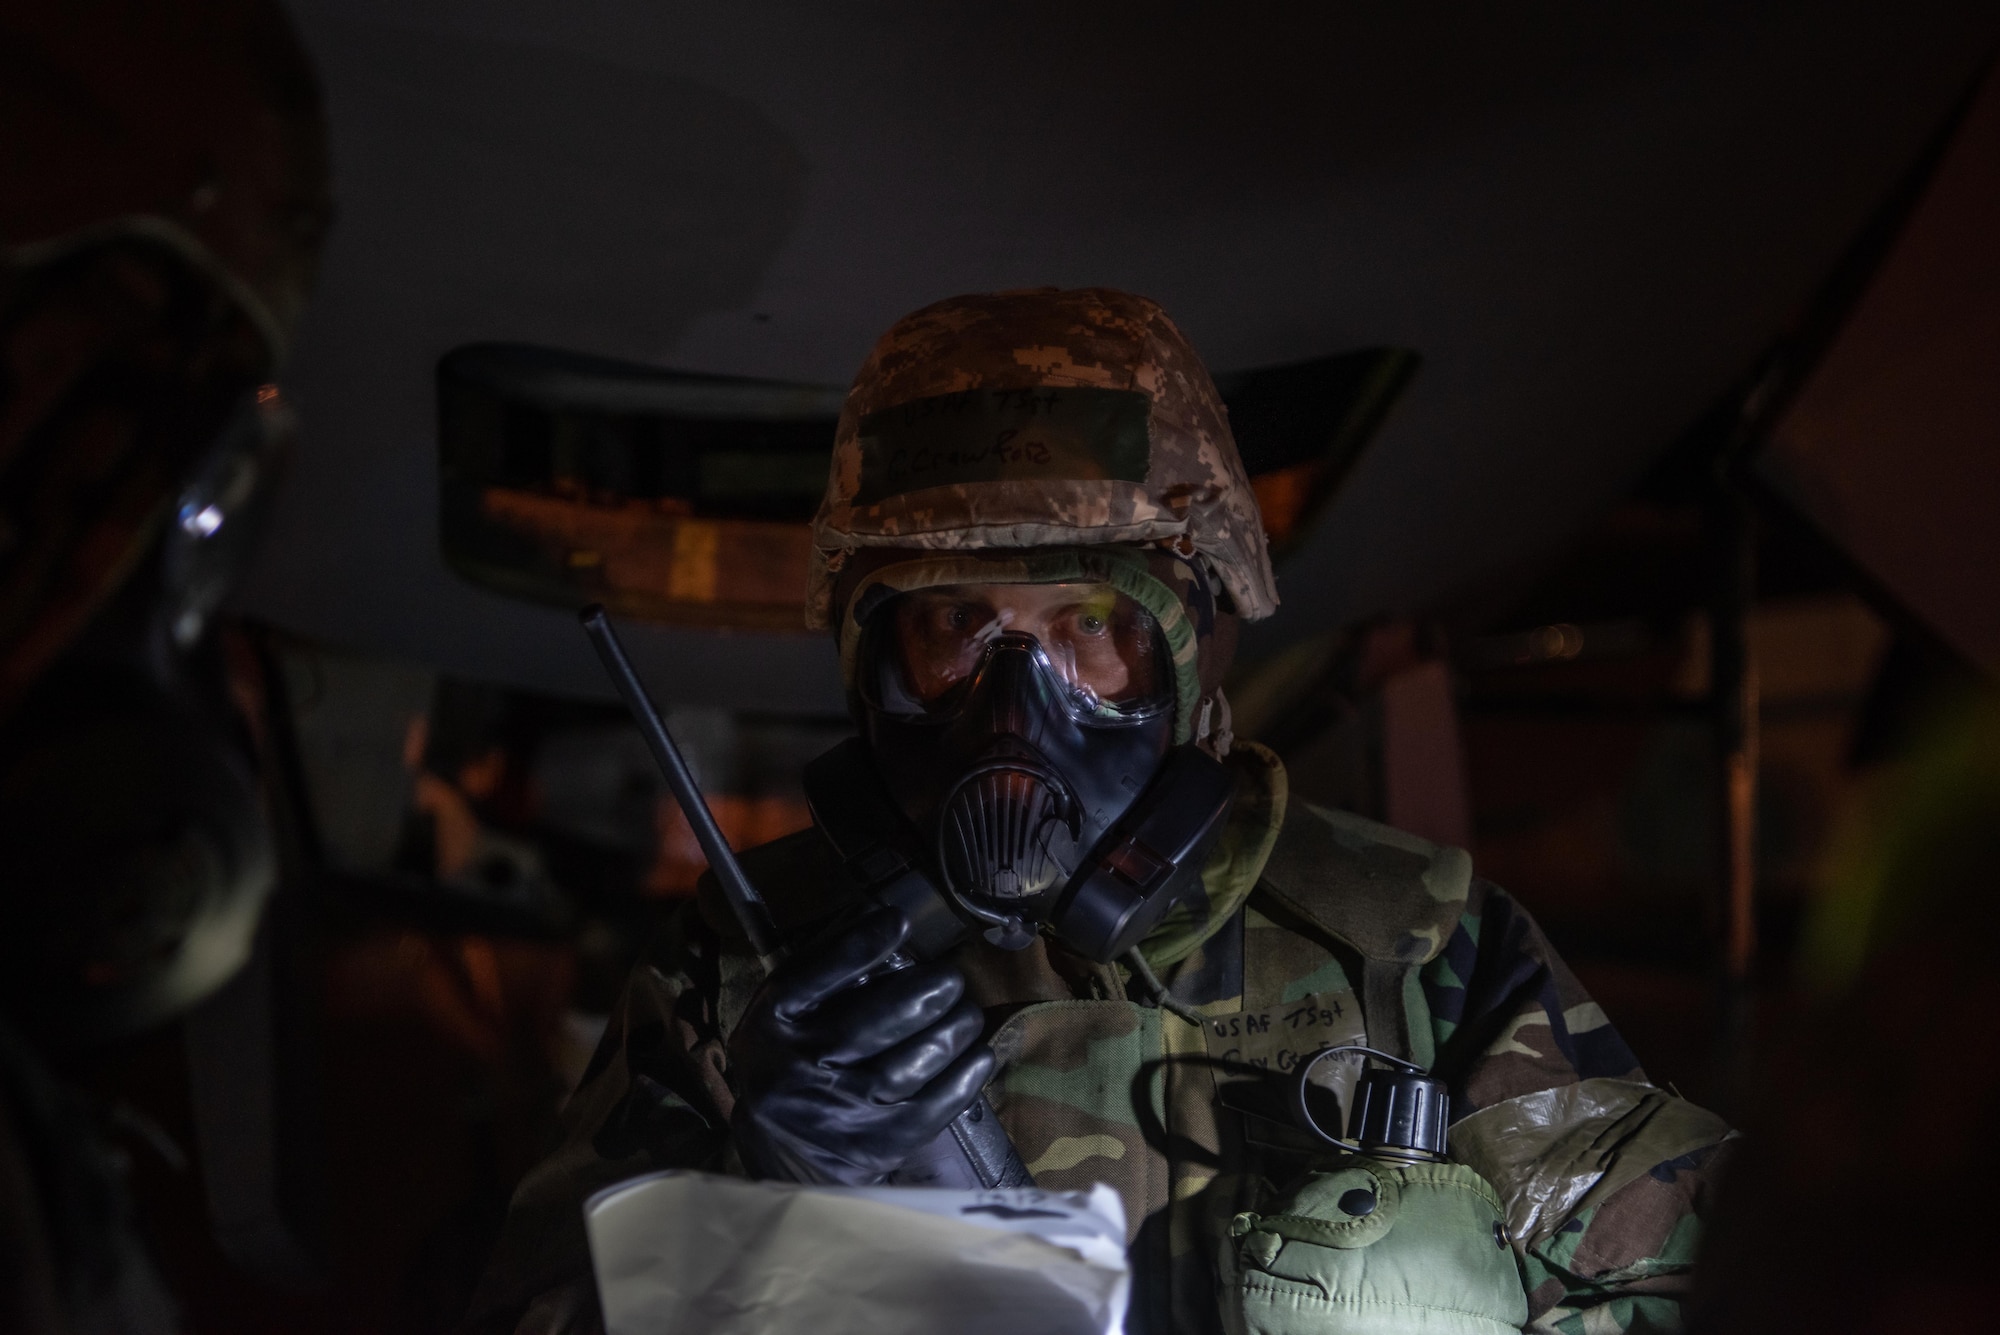 An Airman in protective gear uses a radio to communicate.